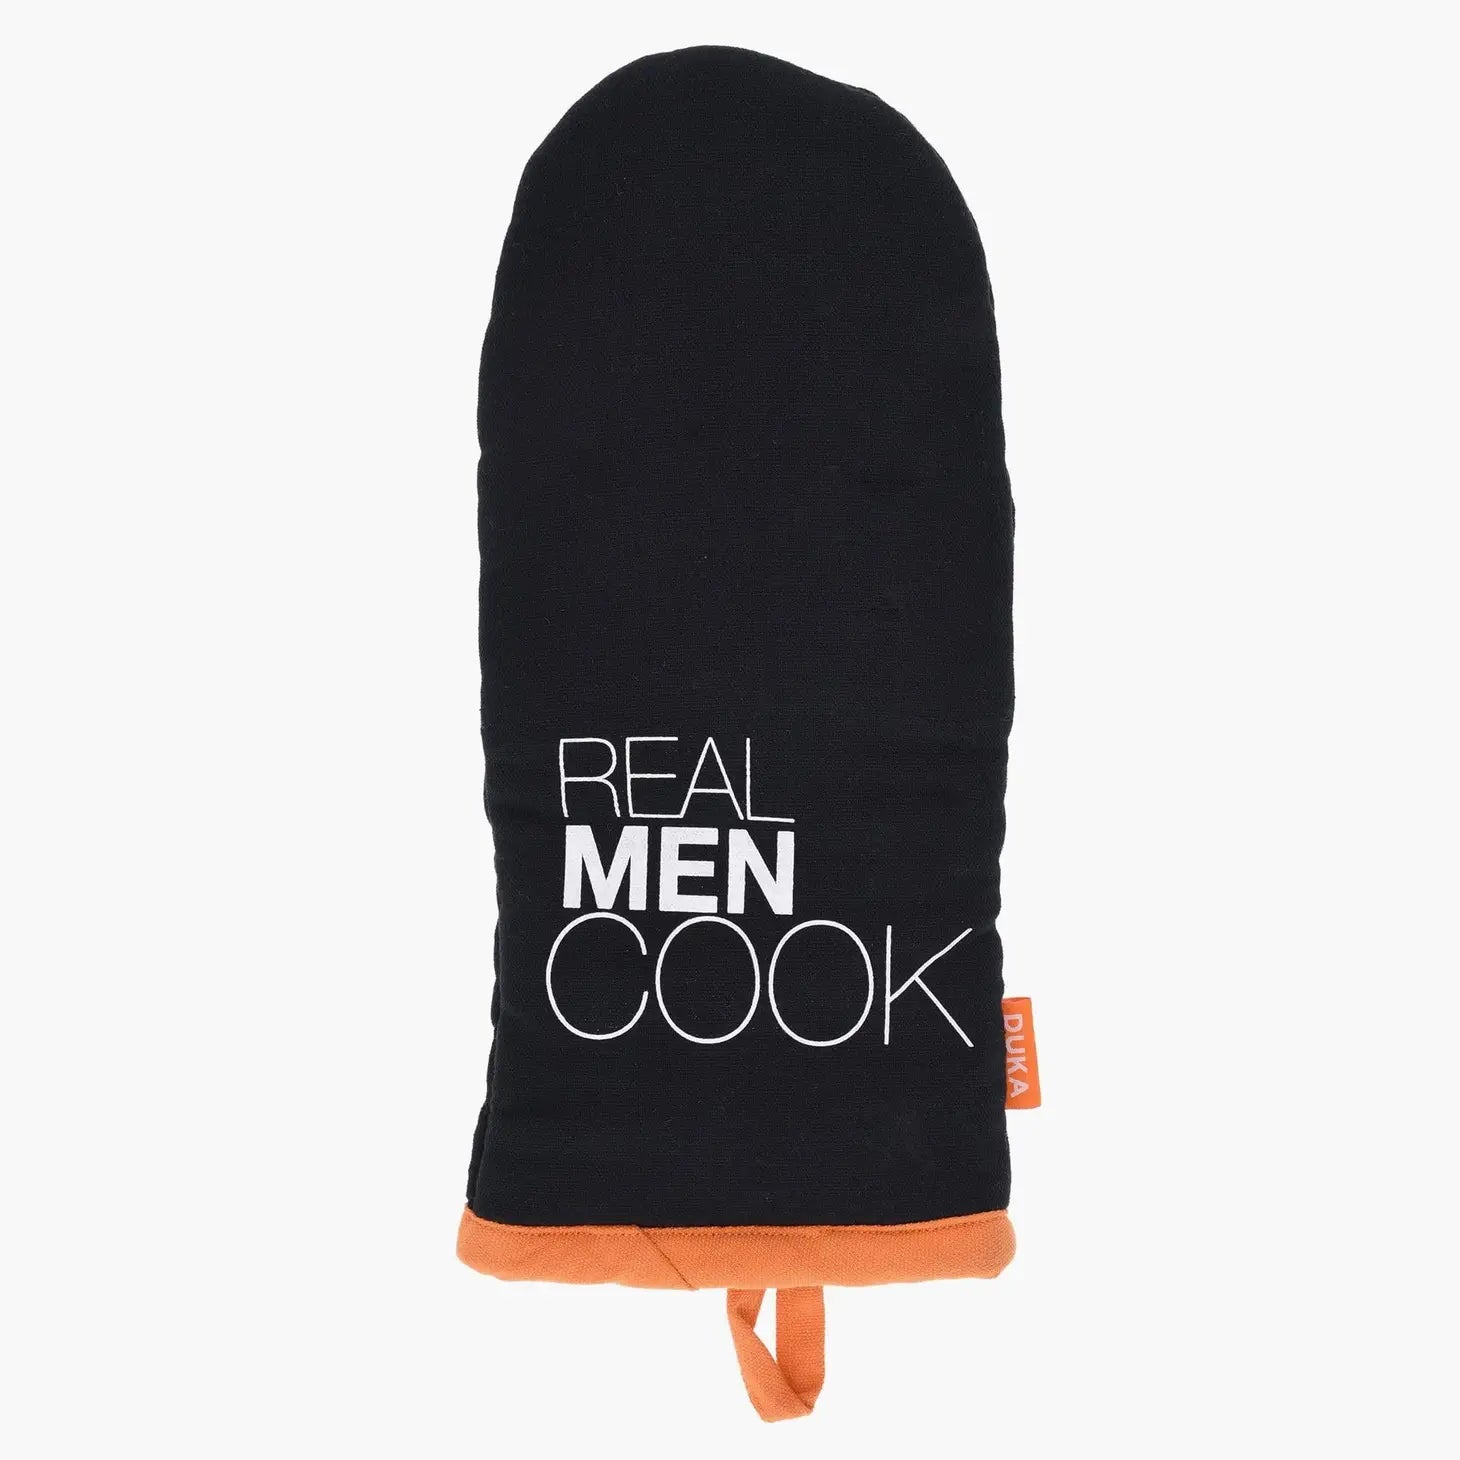 “Real men cook” apron and oven mitts set